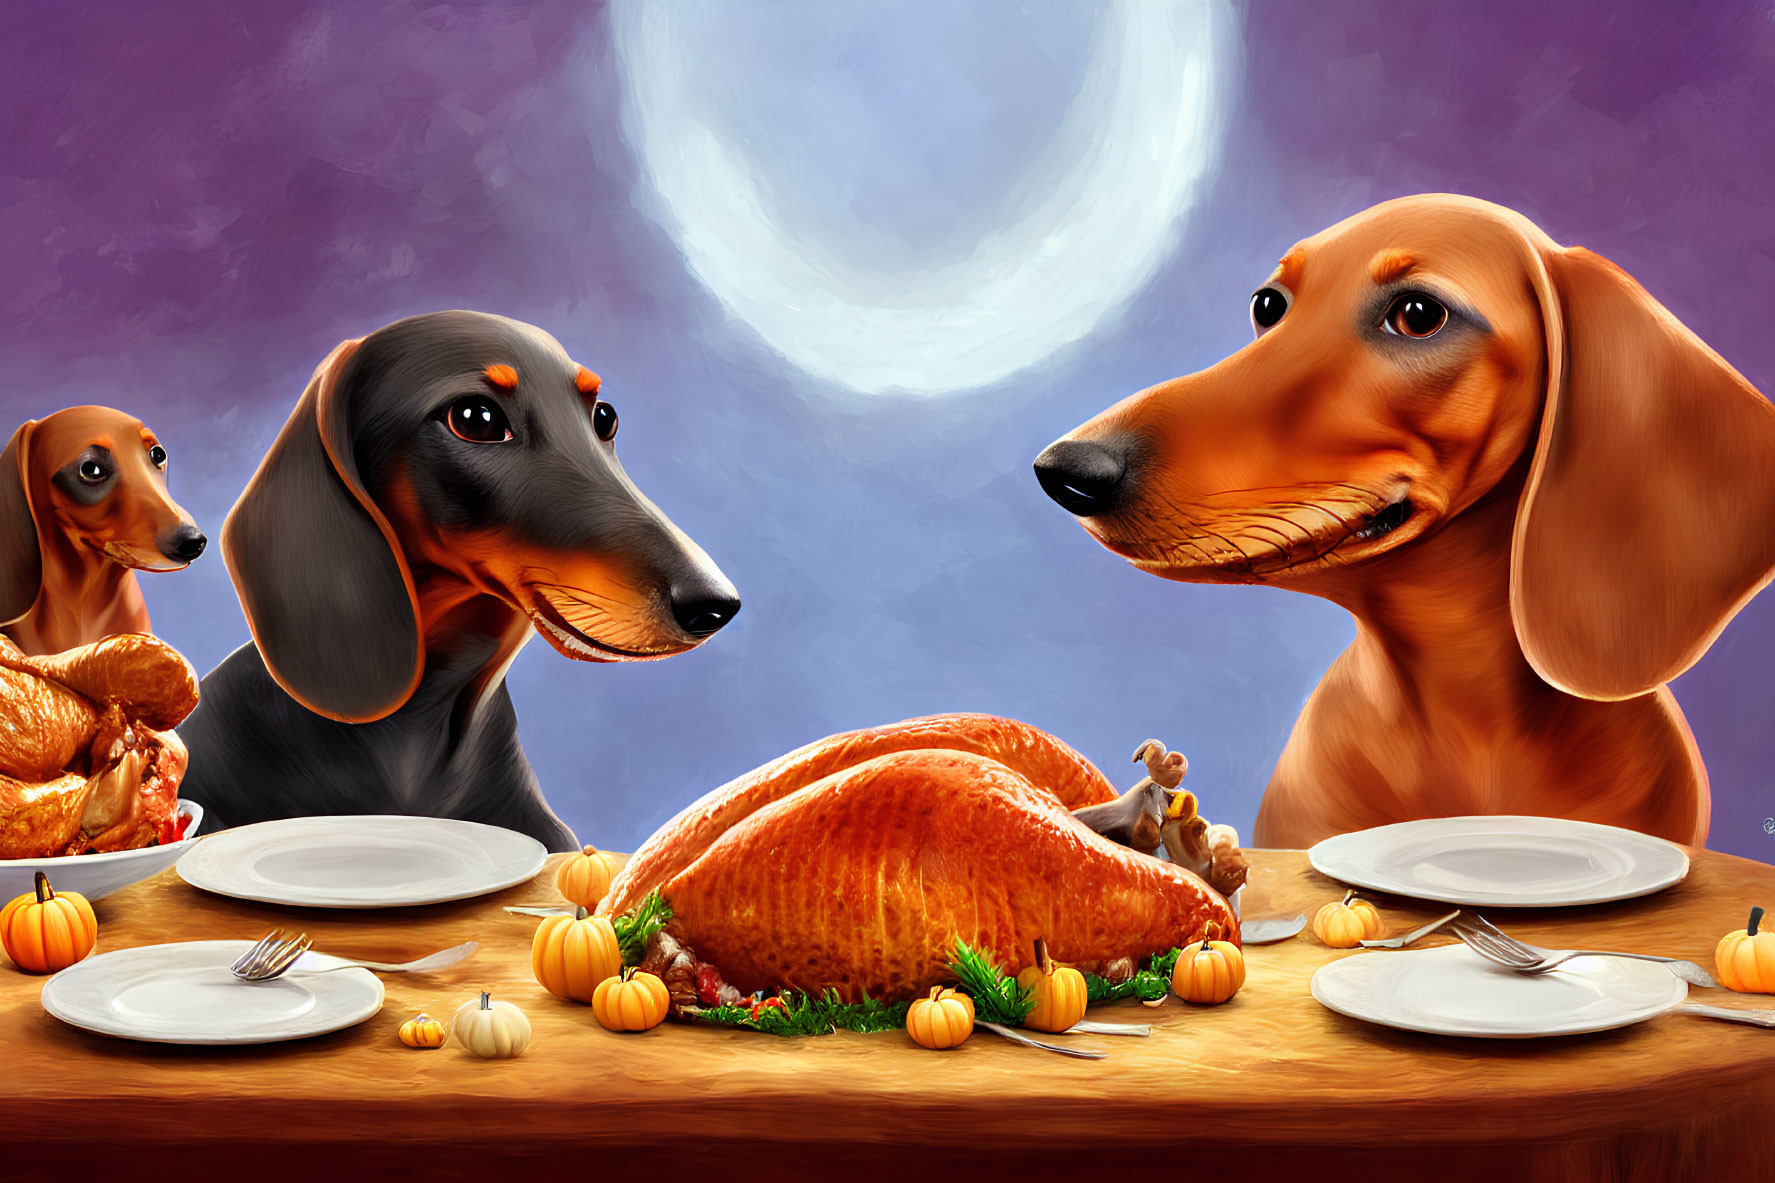 Three cartoon dachshunds at a table with turkey under full moon.